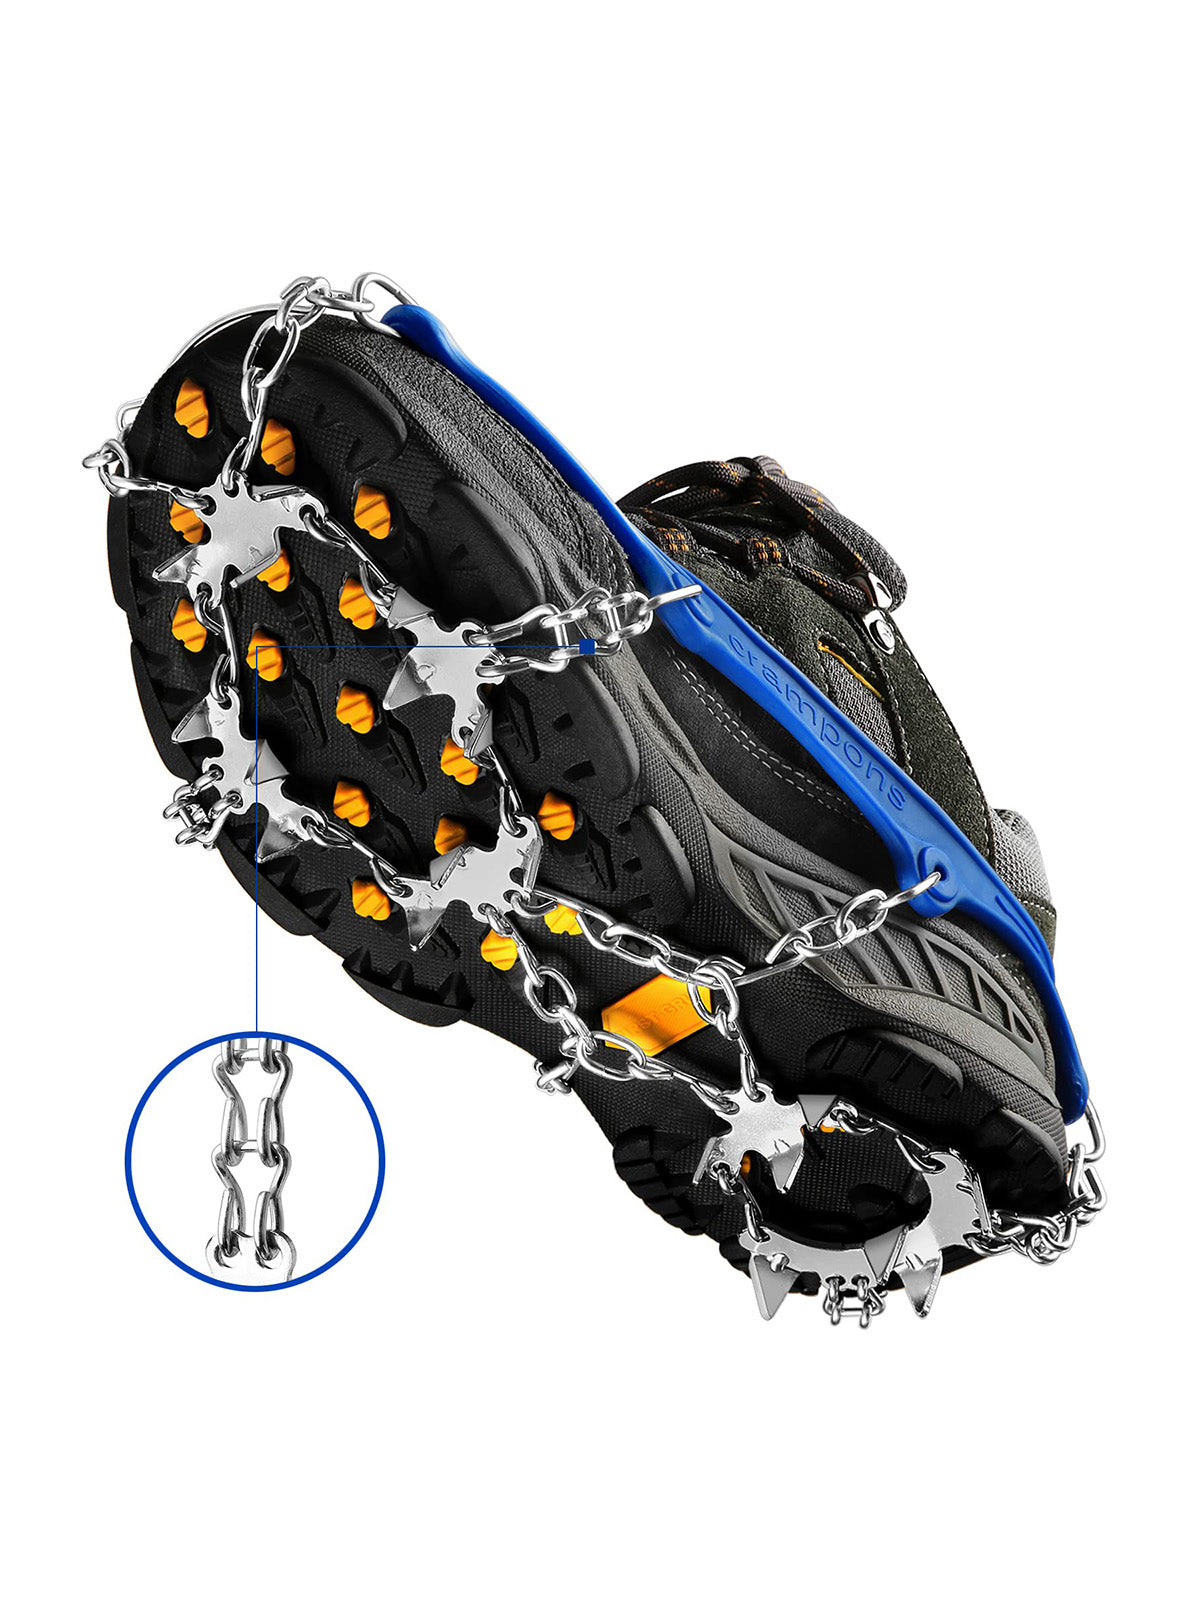 Ice Crampons 19 Micro Spikes Ice Cleats For Boots Anti Slip X-Large Snow  Grips